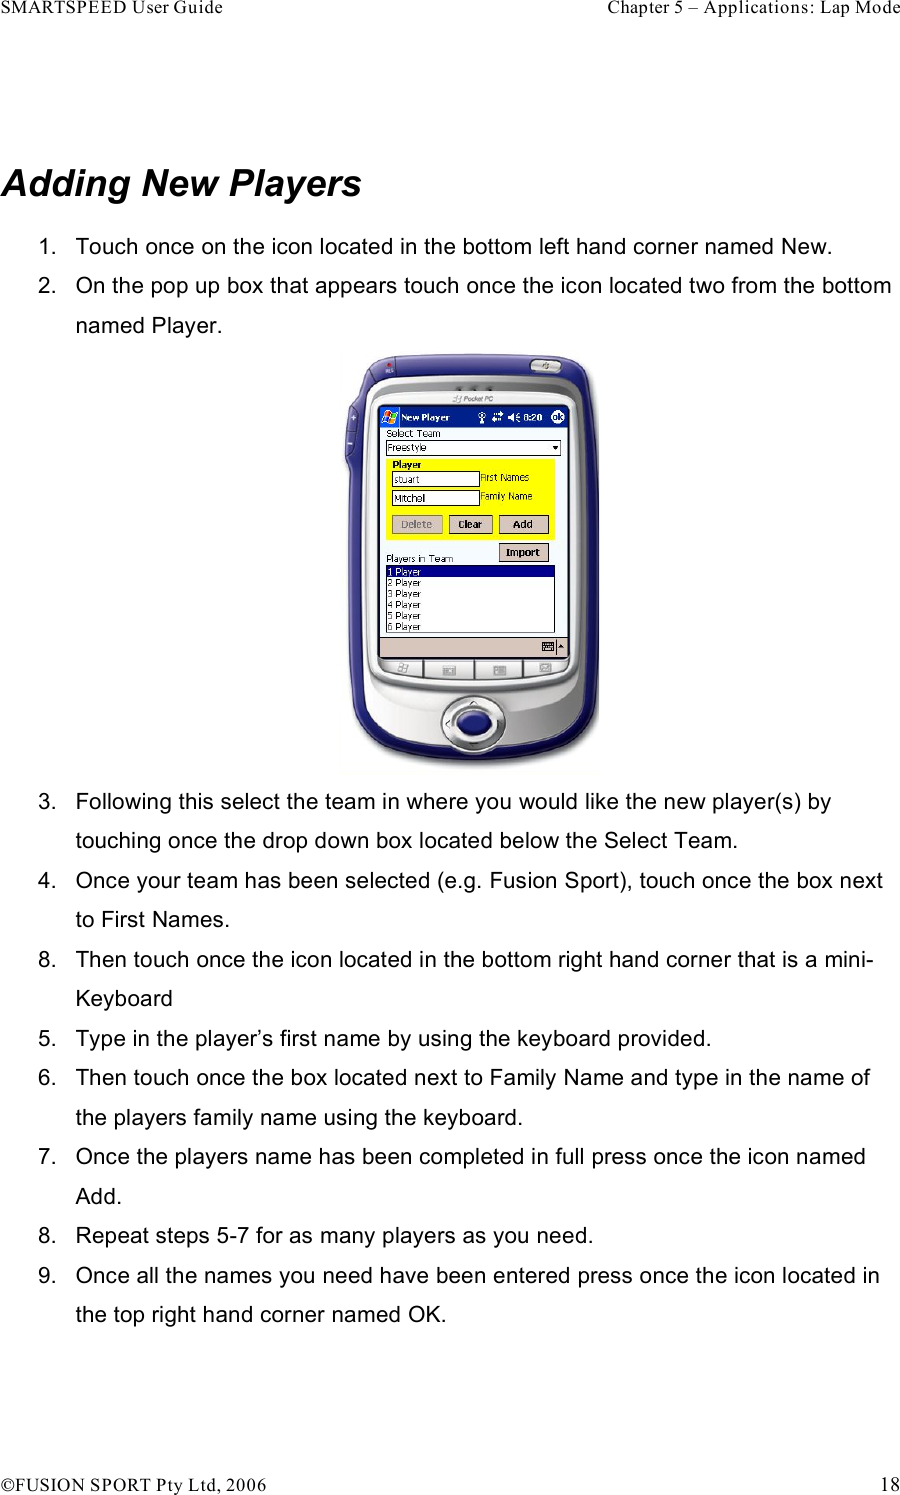 SMARTSPEED User Guide    Chapter 5 – Applications: Lap Mode !FUSION SPORT Pty Ltd, 2006    18  Adding New Players 1.  Touch once on the icon located in the bottom left hand corner named New. 2.  On the pop up box that appears touch once the icon located two from the bottom named Player.   3.  Following this select the team in where you would like the new player(s) by touching once the drop down box located below the Select Team. 4.  Once your team has been selected (e.g. Fusion Sport), touch once the box next to First Names. 8.  Then touch once the icon located in the bottom right hand corner that is a mini-Keyboard 5.  Type in the player’s first name by using the keyboard provided. 6.  Then touch once the box located next to Family Name and type in the name of the players family name using the keyboard. 7.  Once the players name has been completed in full press once the icon named Add. 8.  Repeat steps 5-7 for as many players as you need. 9.  Once all the names you need have been entered press once the icon located in the top right hand corner named OK.  